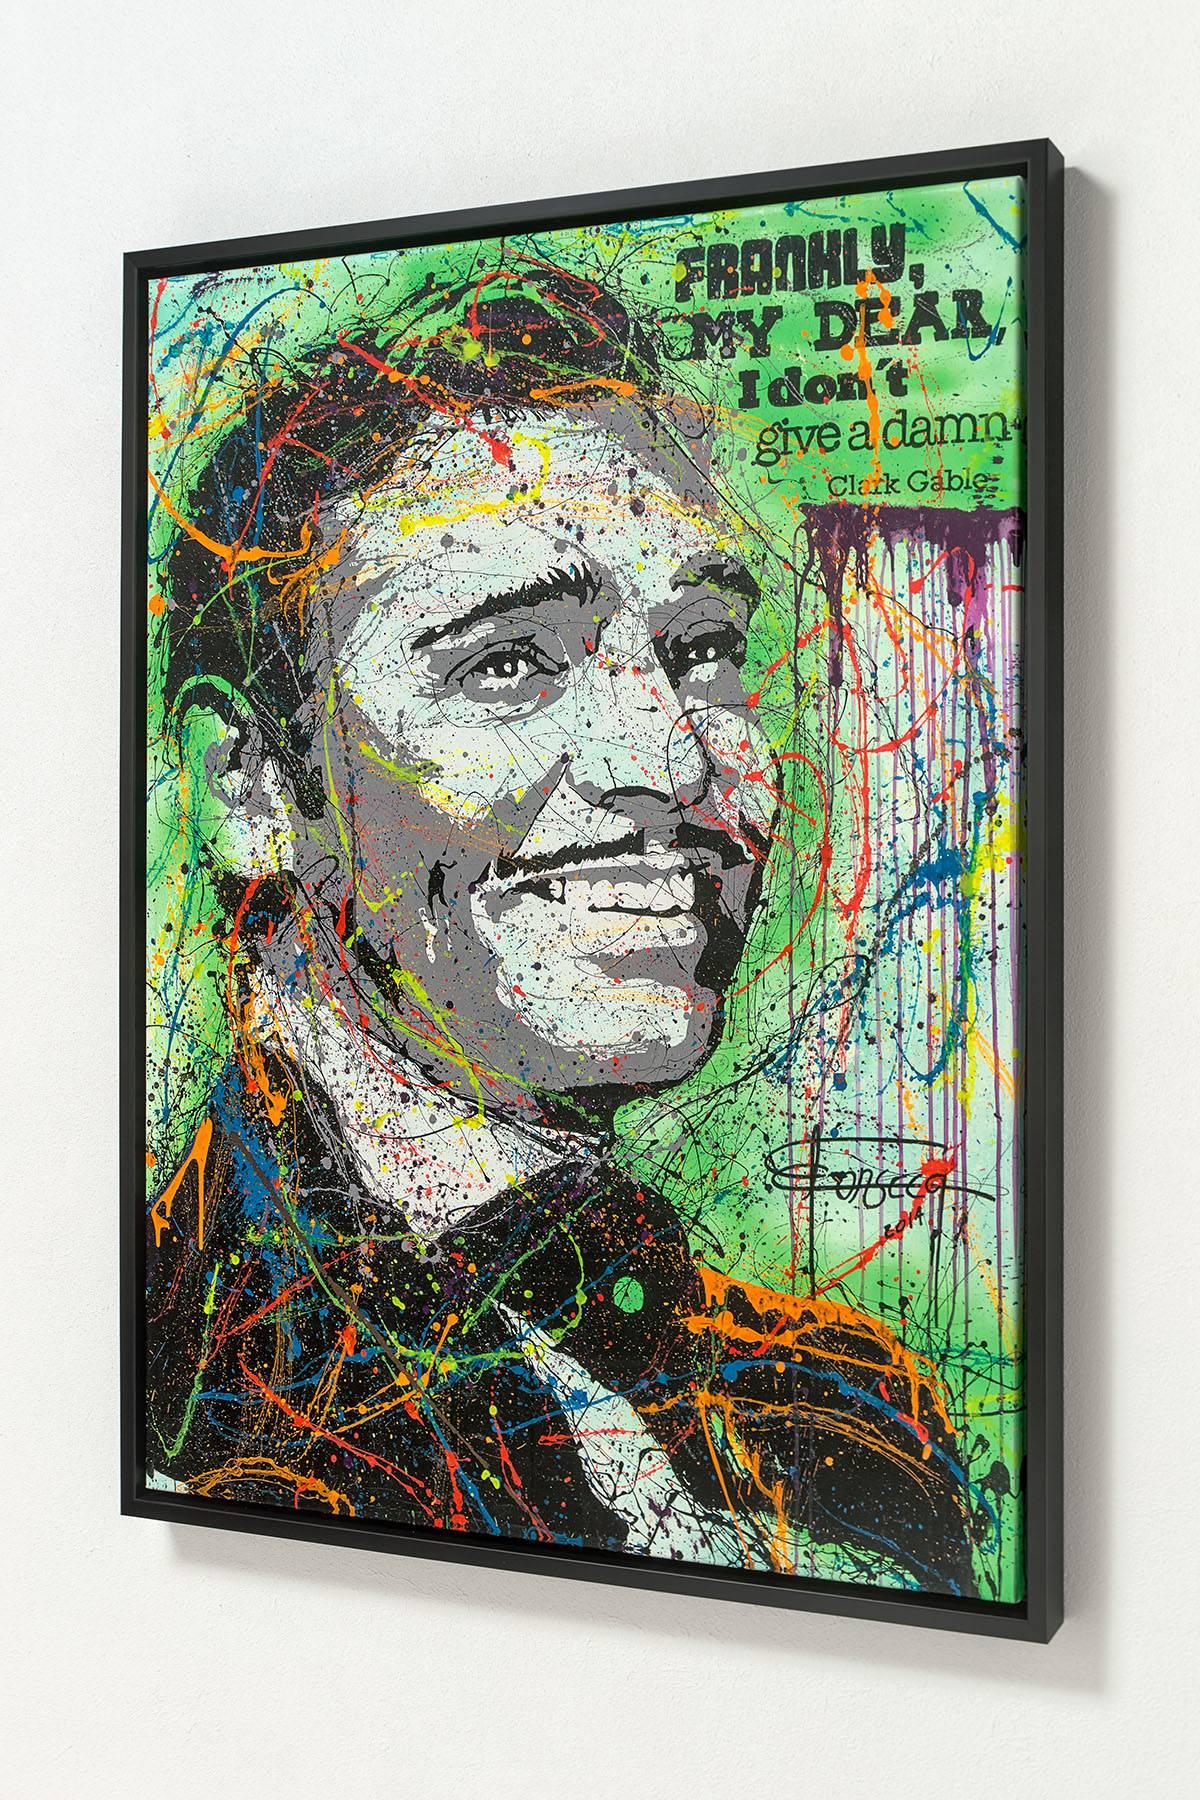 Frankly My Dear - Framed Fine Art Limited Edition of 99 - Contemporary Print by Pedro Fonseca